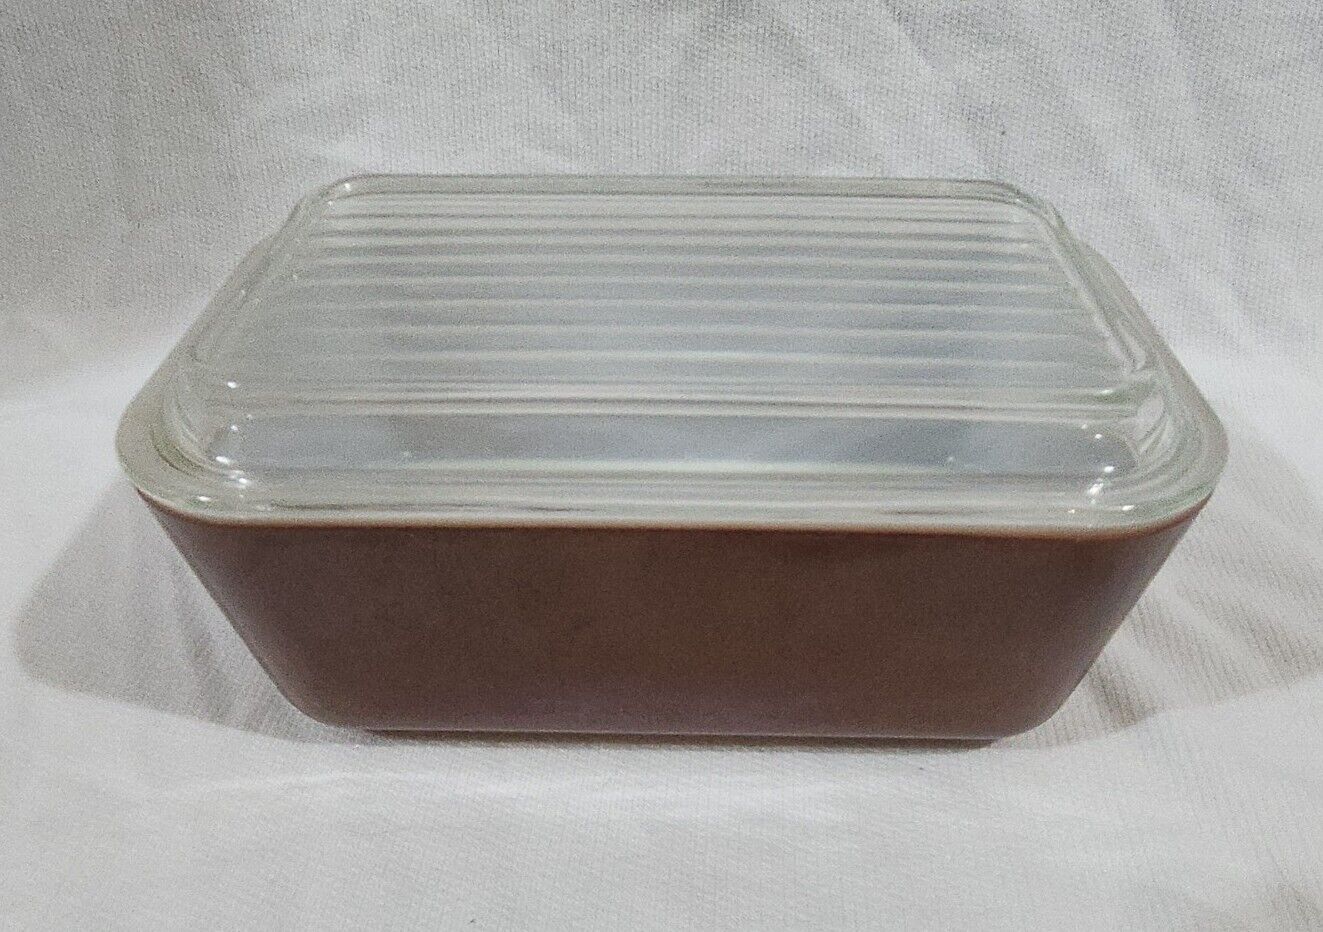 Vintage Pyrex 502 Old Orchard Brown 1-1/2 Pint Medium Refrigerator Dish with Lid